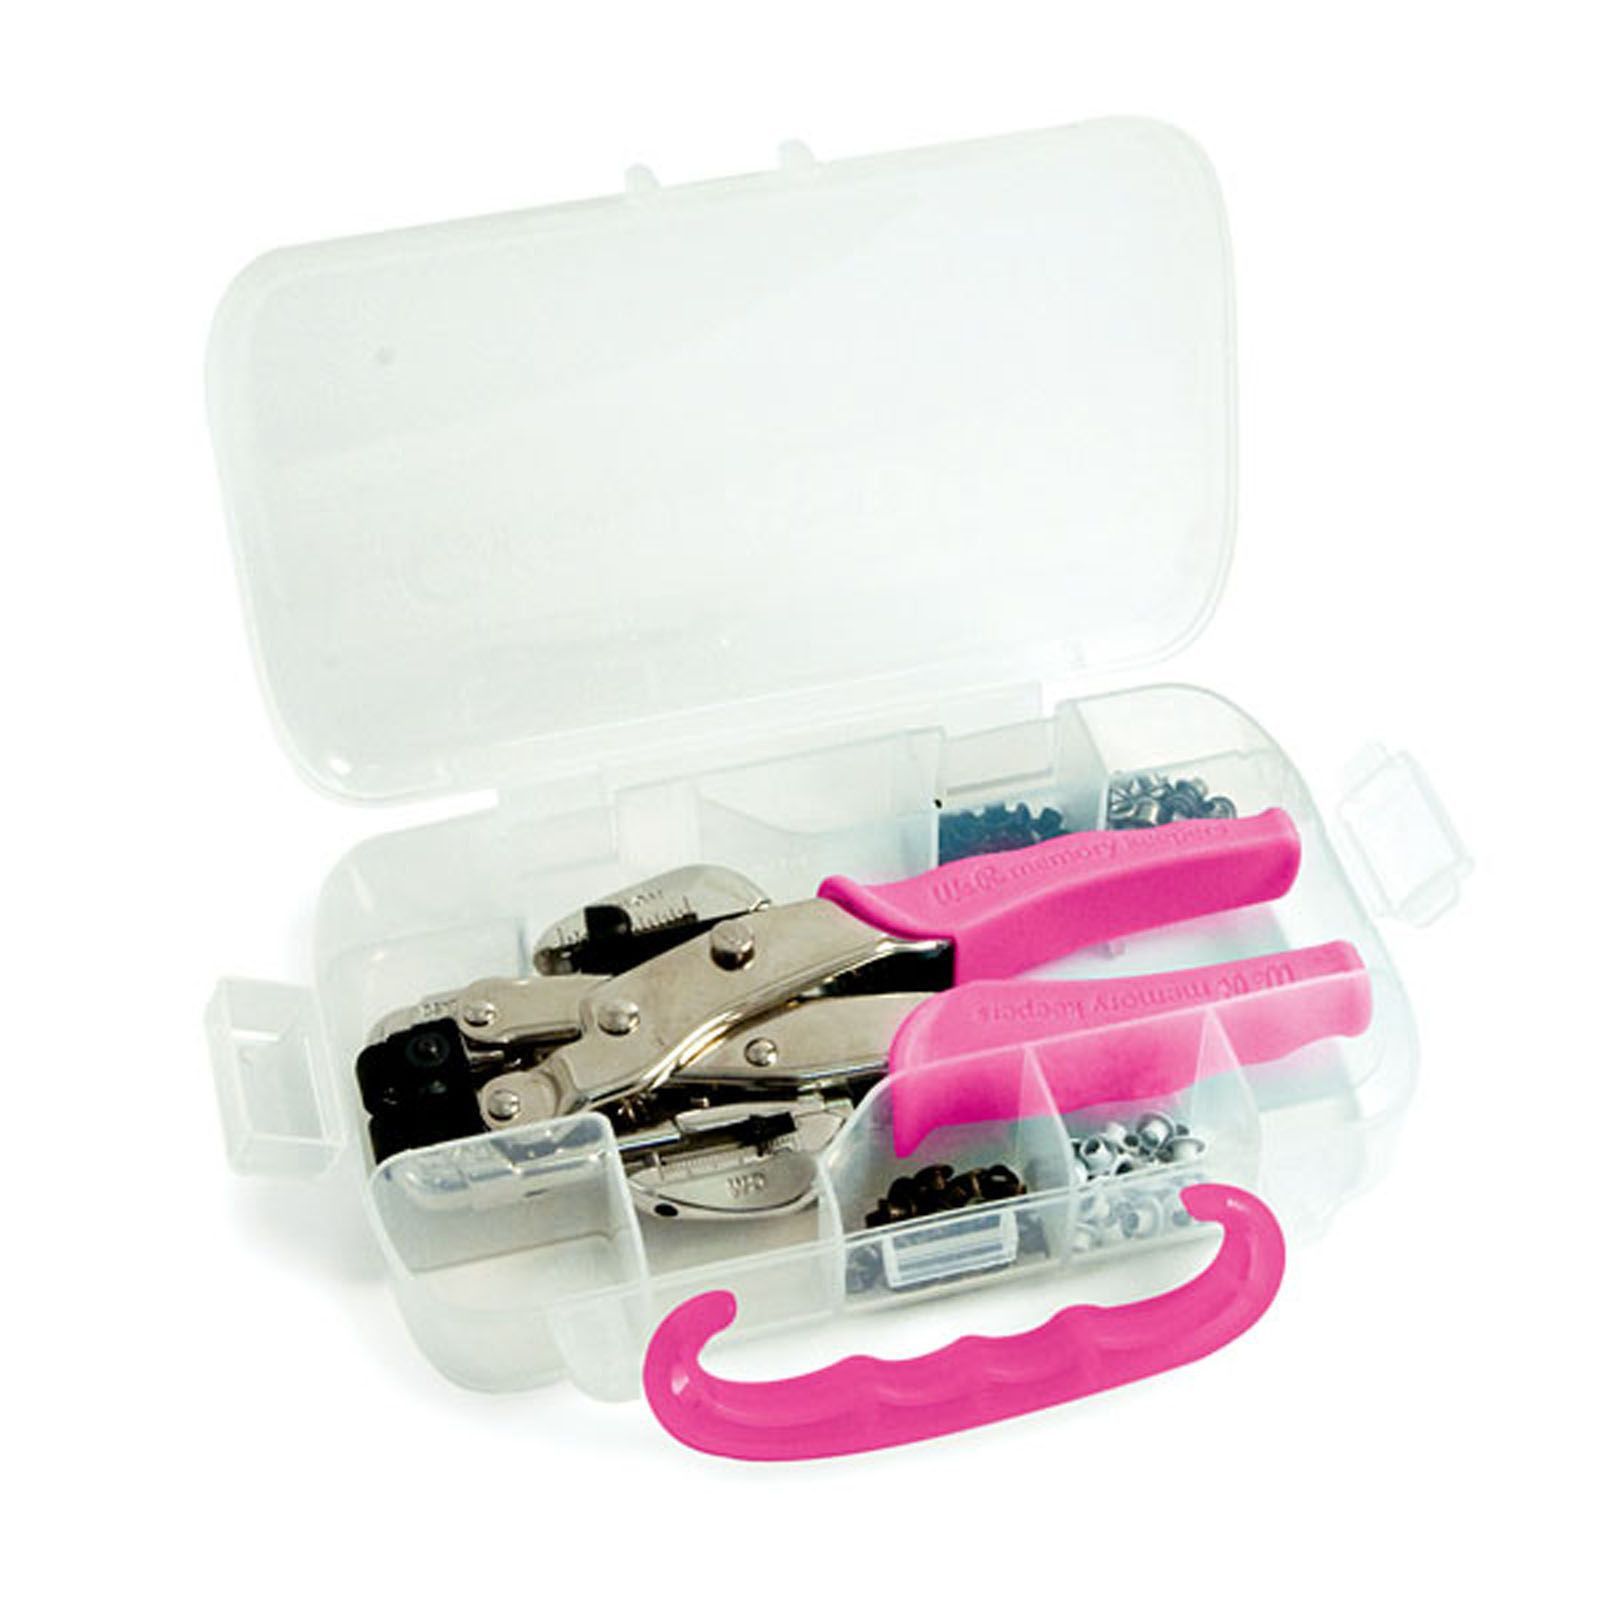 We R Memory Keepers  Crop-A-Dile Punch and Pink Case